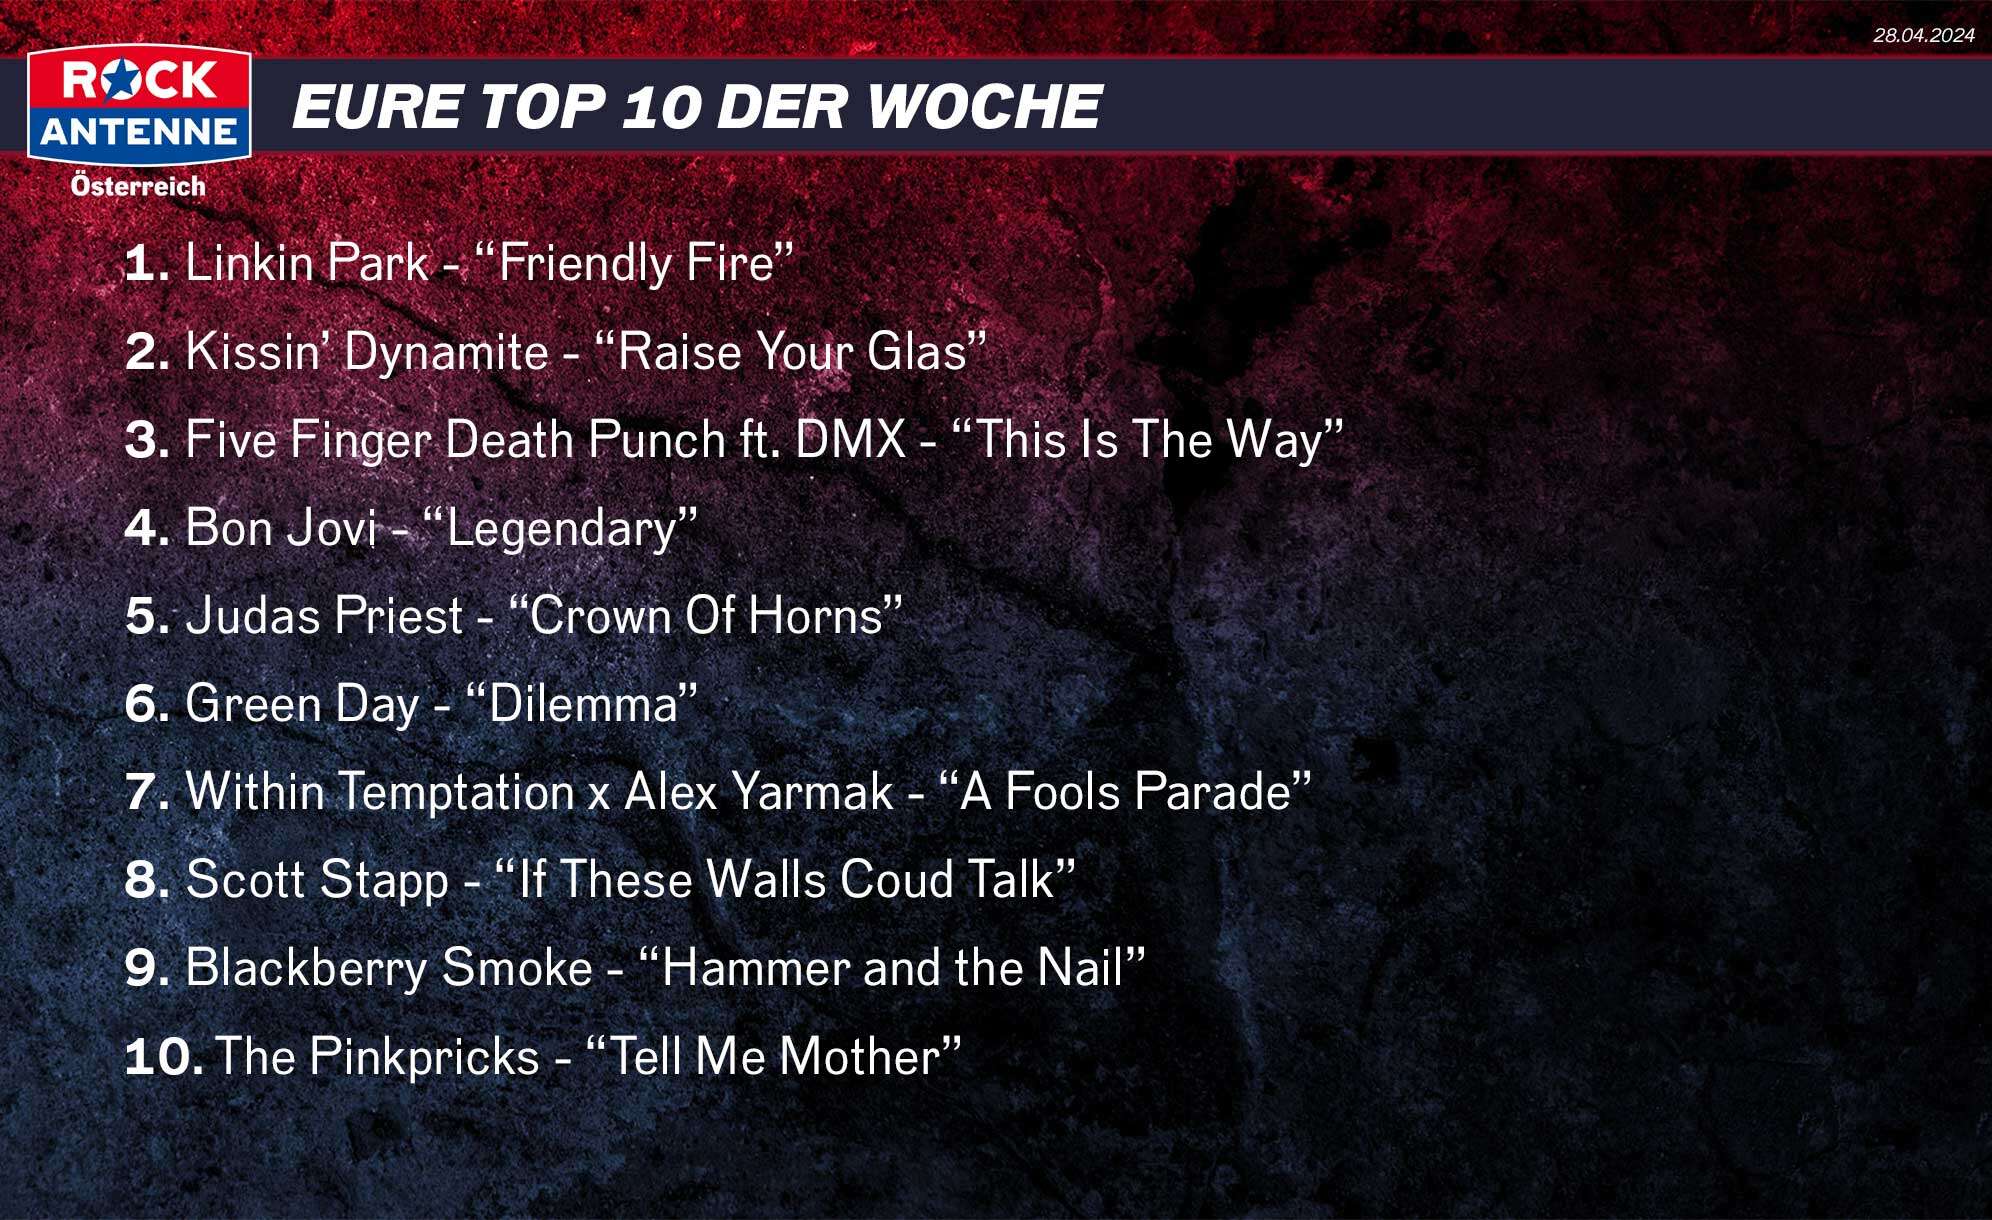 Die Top 10 der Woche vom 27.04.2024: 1. Linkin Park - “Friendly Fire” 2. Kissin’ Dynamite - “Raise Your Glas” 3. Five Finger Death Punch ft. DMX - “This Is The Way” 4. Bon Jovi - “Legendary” 5. Judas Priest - “Crown Of Horns” 6. Green Day - “Dilemma” 7. Within Temptation x Alex Yarmak - “A Fools Parade” 8. Scott Stapp - “If These Walls Coud Talk” 9. Blackberry Smoke - “Hammer and the Nail” 10. The Pinkpricks - “Tell Me Mother”